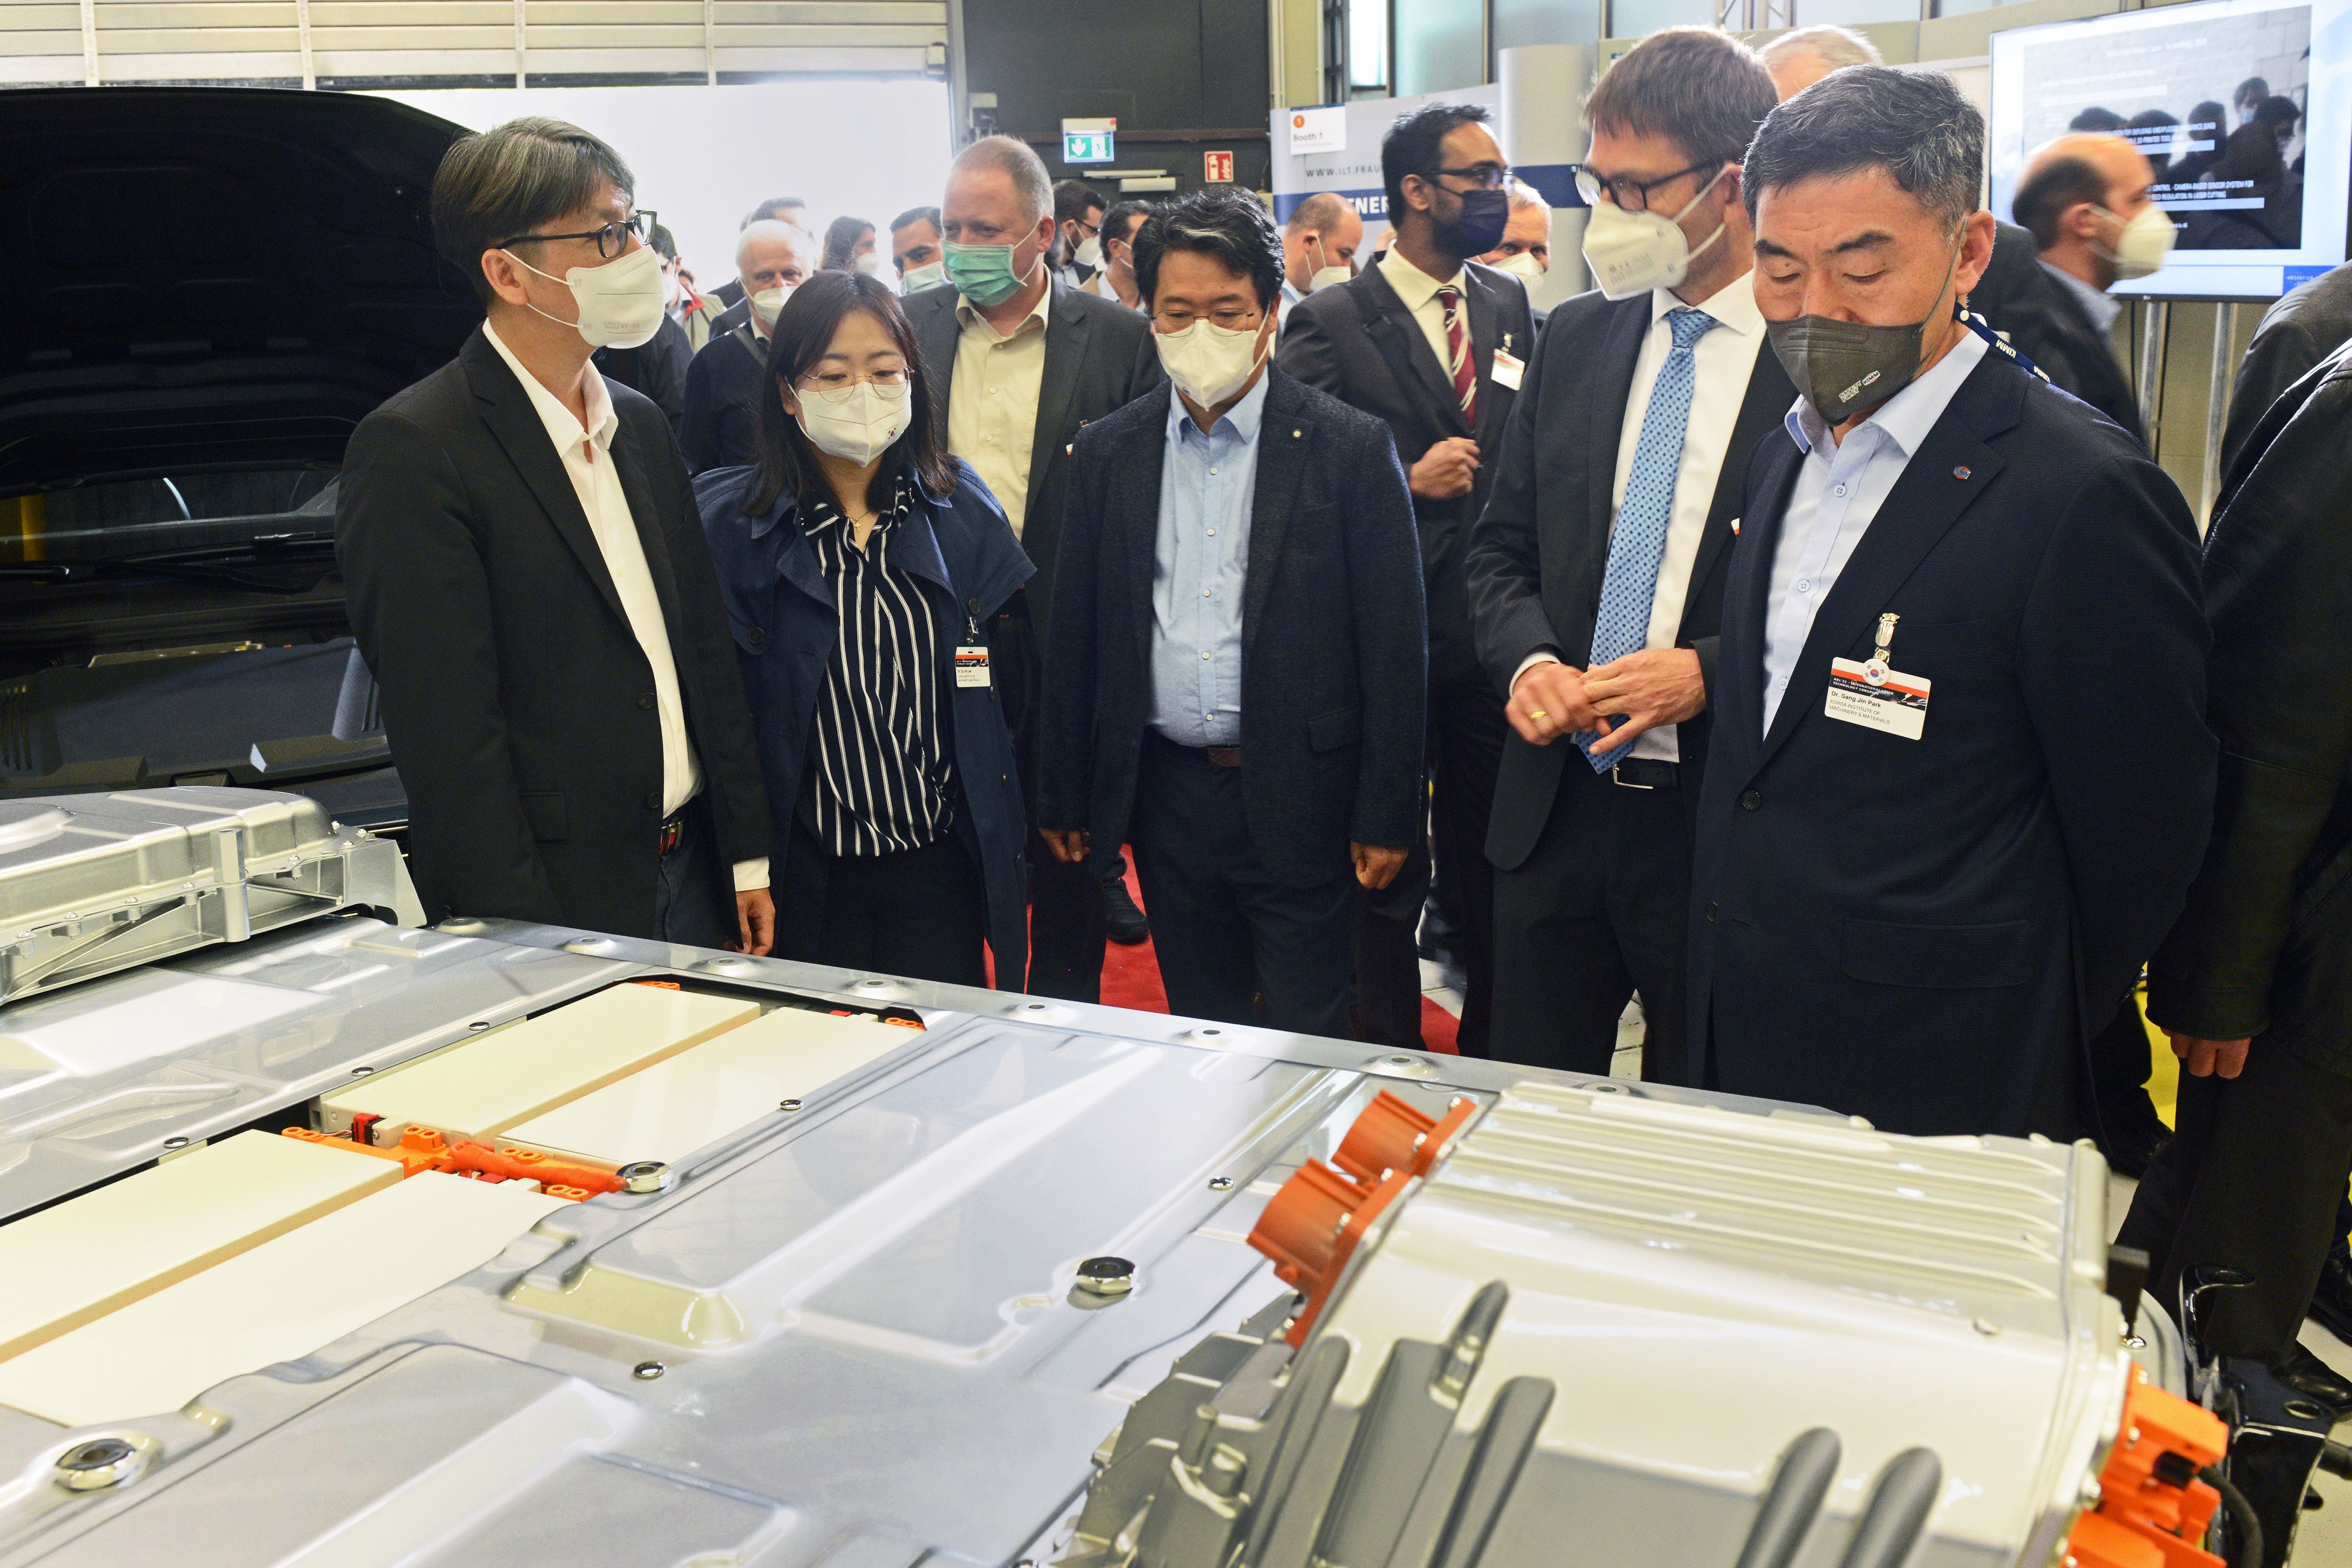 The Korean delegation visited the laboratories of Fraunhofer ILT, Europe's largest institute for applied laser technology, as part of AKL’22. Pictured: AUDI battery module for an electric vehicle.